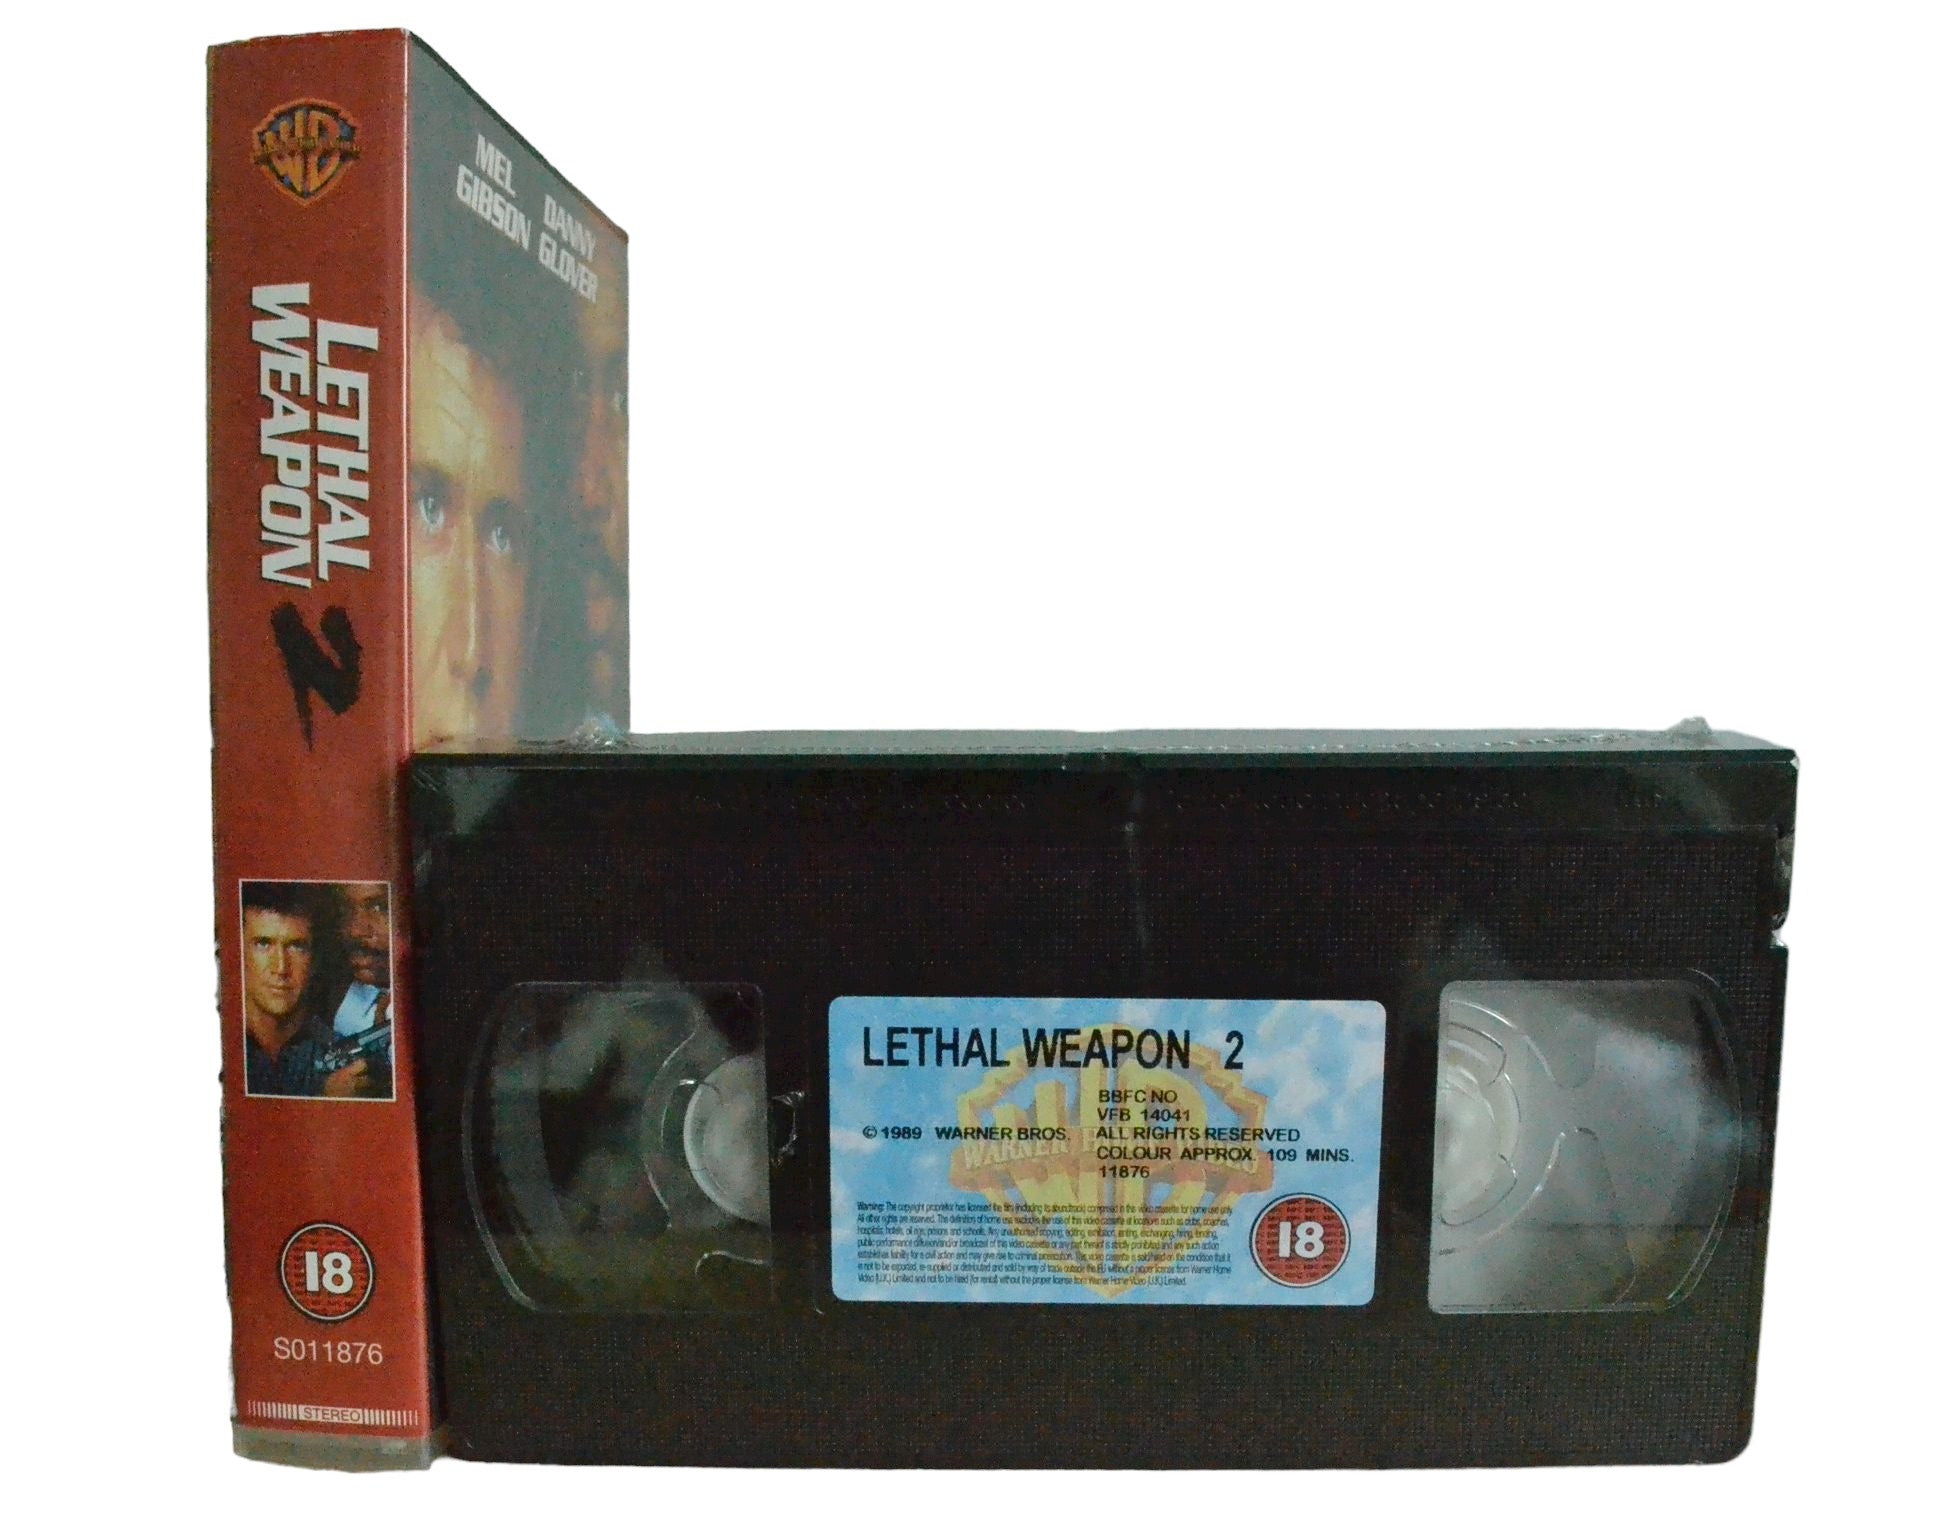 Lethal Weapon 2 - Mel Gibson - Warner Home Video - Brand New Sealed - Pal VHS-